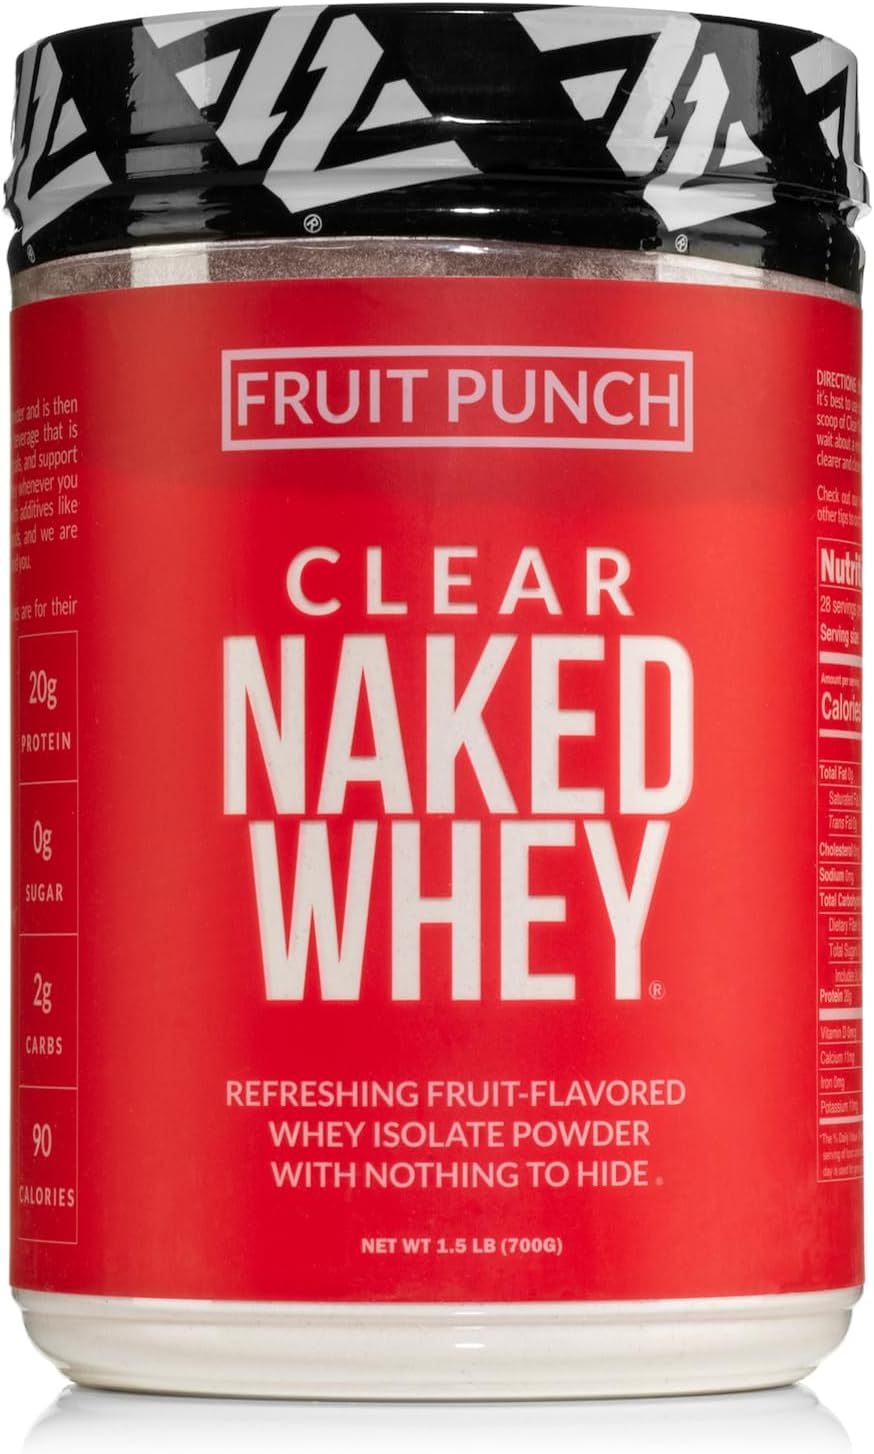 NAKED nutrition Clear Naked Whey Protein Isolate, Fruit Punch, Iso Protein Powder, No Gmos Or Artificial Sweeteners, Gluten-Free, Soy-Free - 28 Servings